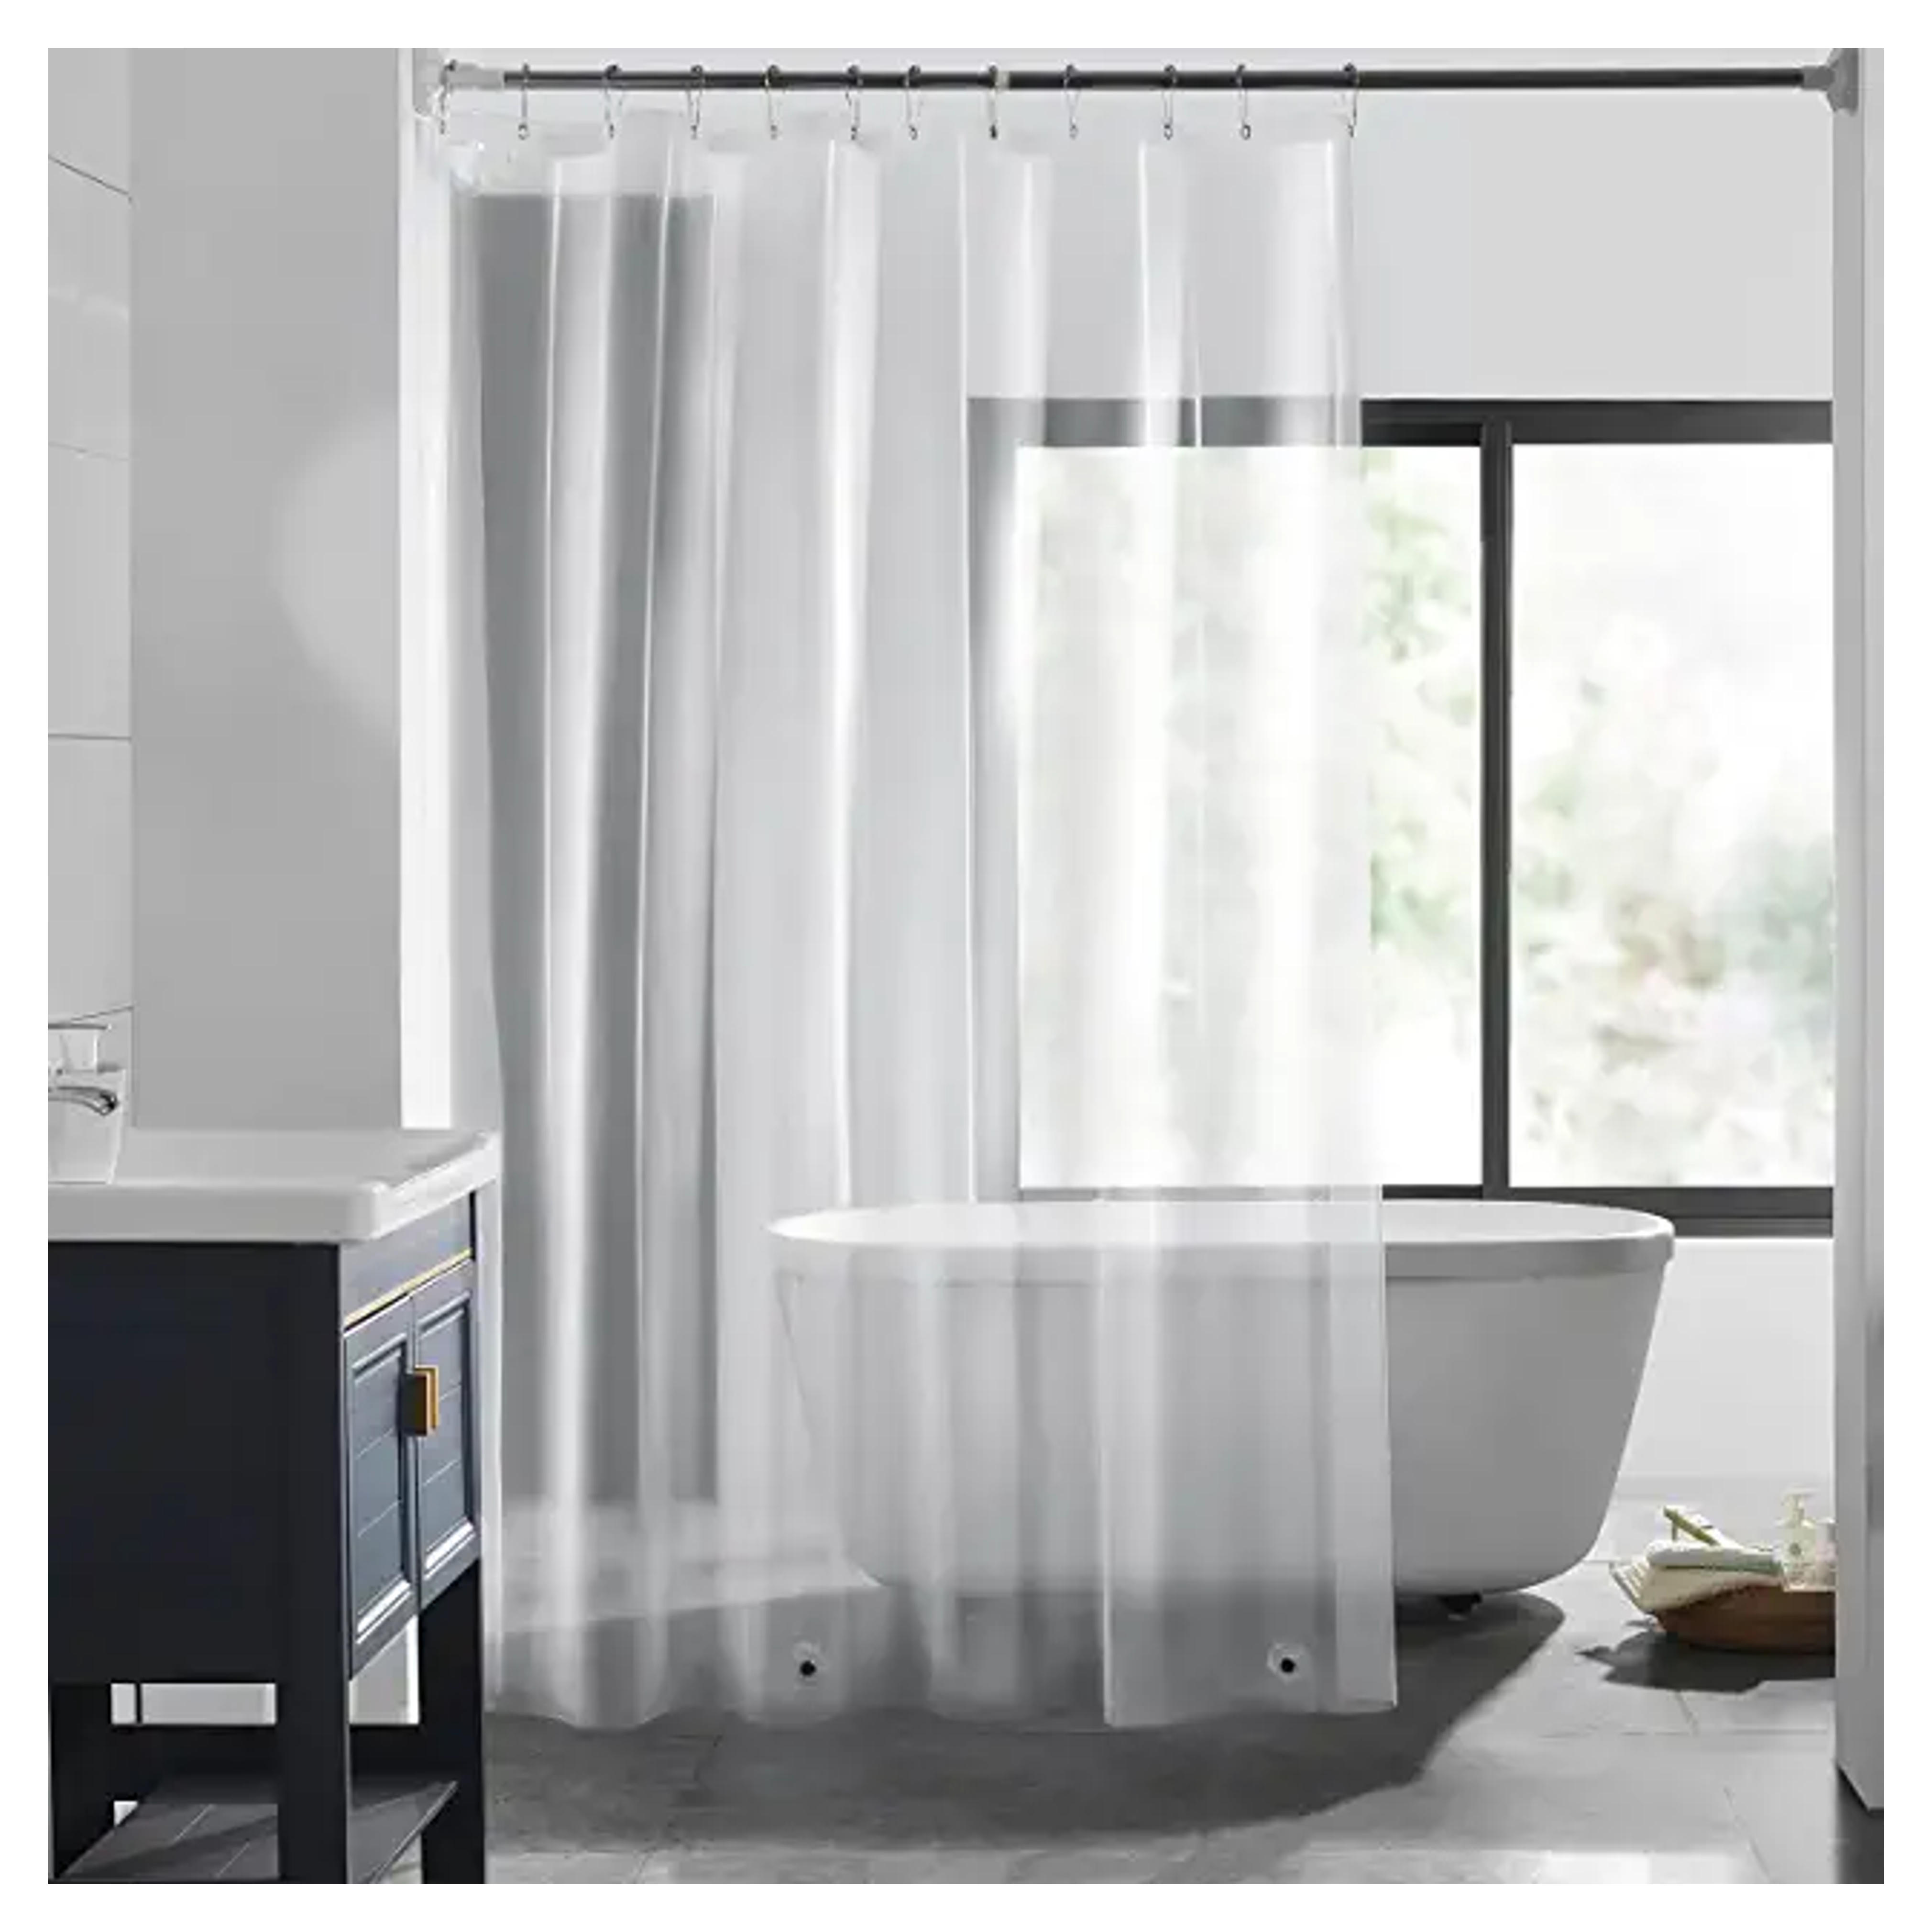 Amazon.com: LOVTEX Clear Shower Curtain Liner - 72" x 72" Lightweight Shower Liner for Bathroom Shower Curtain (4G Clear, 1PC) : Home & Kitchen